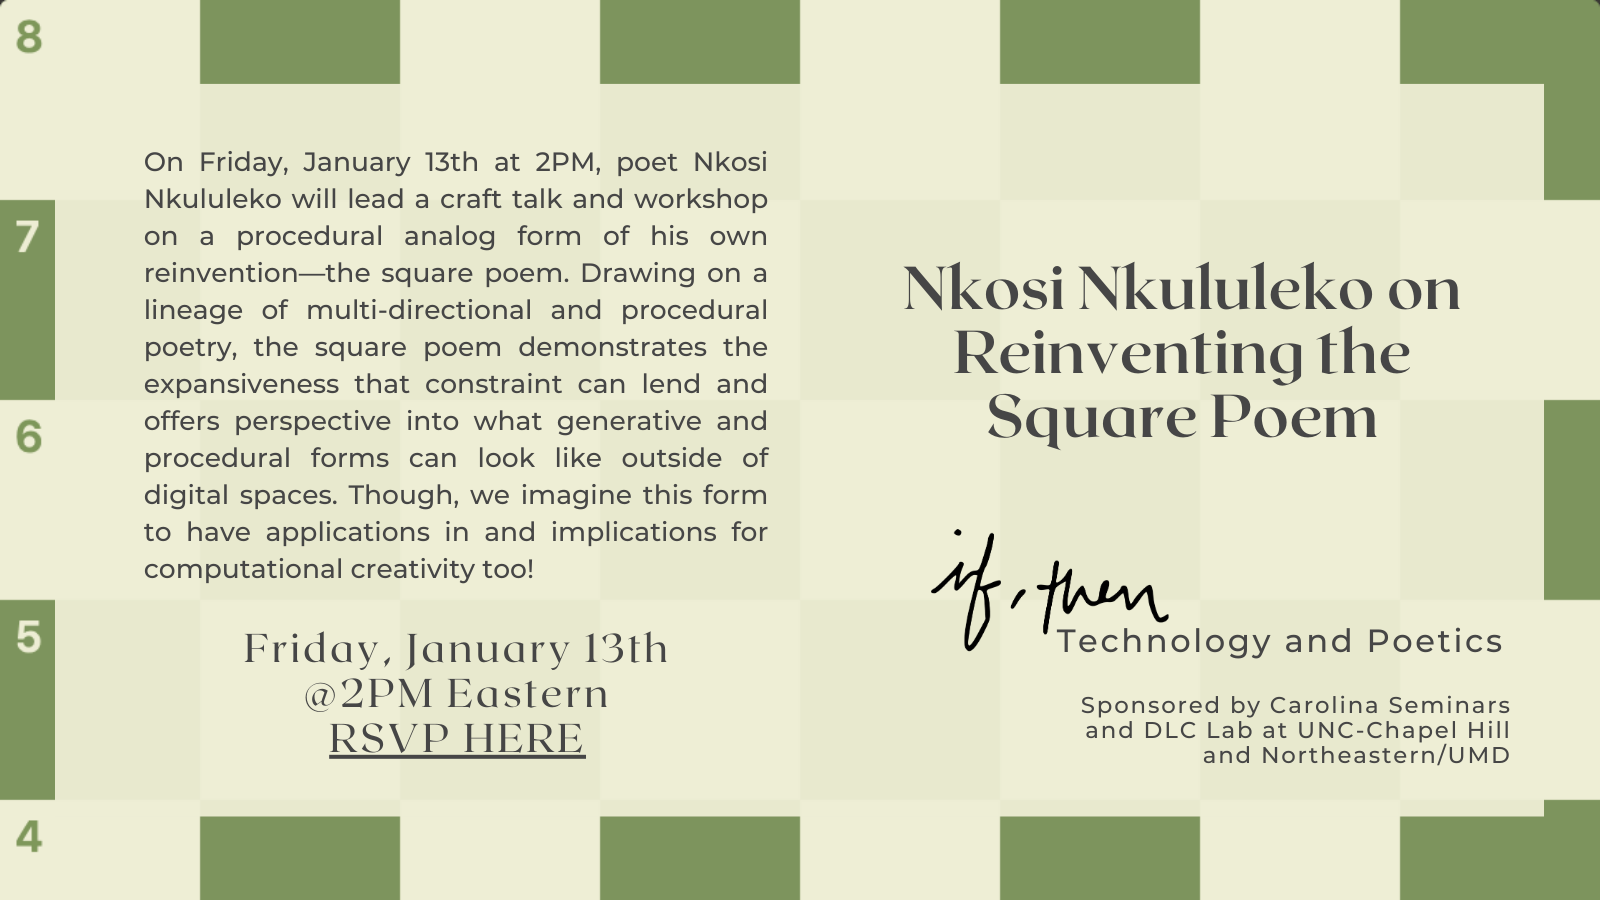 On Friday, January 13th at 2PM, poet Nkosi Nkululeko will lead a craft talk and workshop on a procedural analog form of his own reinvention—the square poem. Drawing on a lineage of multi-directional and procedural poetry, the square poem demonstrates the expansiveness that constraint can lend and offers perspective into what generative and procedural forms can look like outside of digital spaces. Though, we imagine this form to have applications in and implications for computational creativity too! Friday, January 13 @2PM Eastern Nkosi Nkululeko on Reinventing the Square Poem If, Then Technology and Poetics. Supported by Carolina Seminars and the Digital Literacy and Communications Lab at UNC-Chapel Hill and Northeastern/UMD.